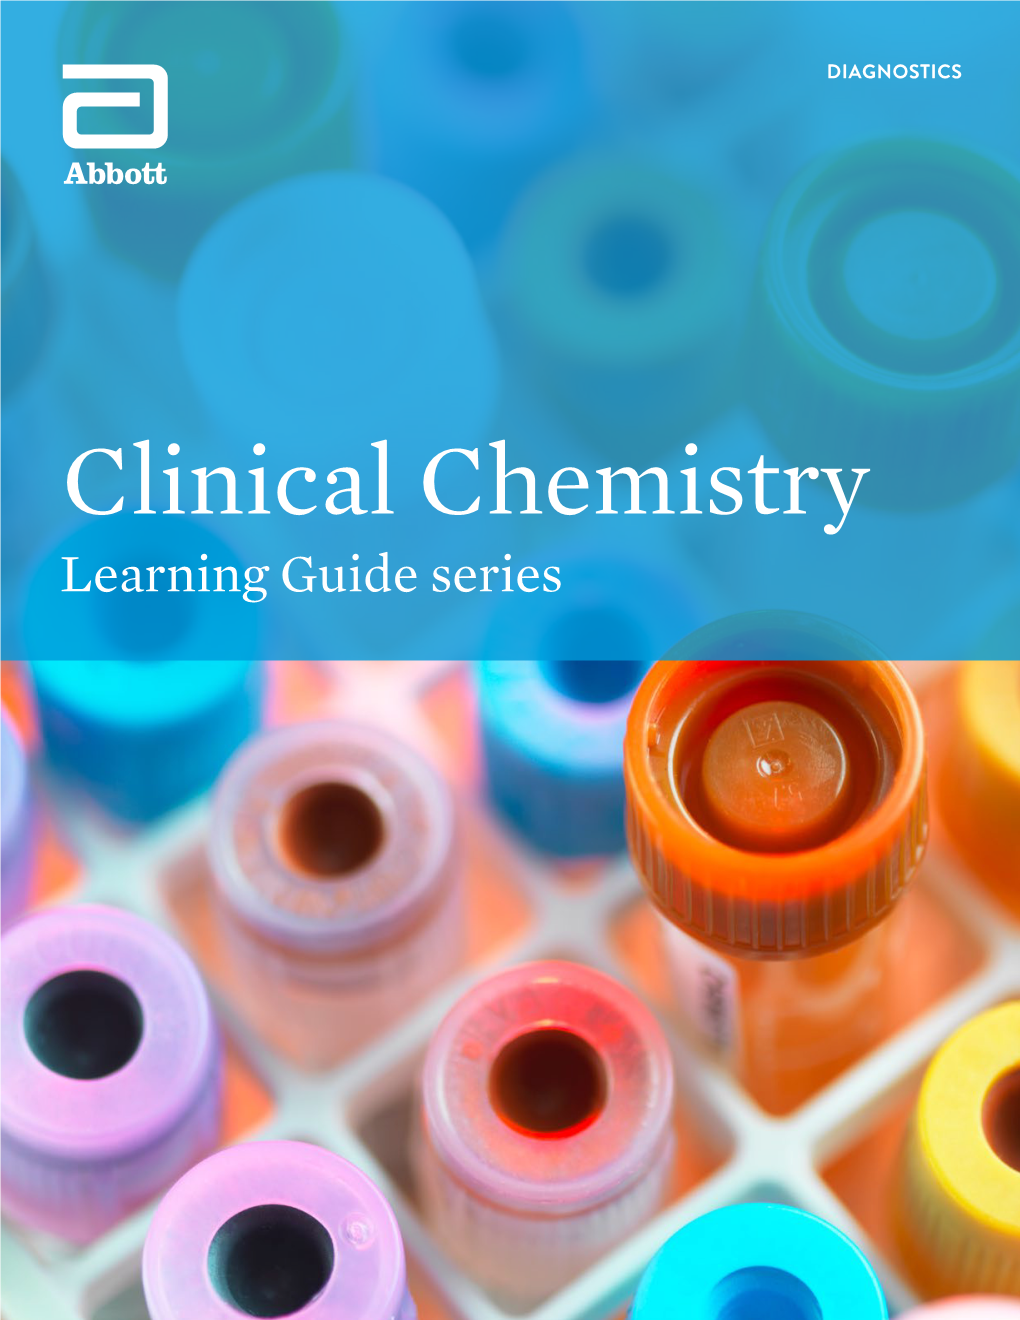 Clinical Chemistry Learning Guide Series ABBOTT DIAGNOSTICS CLINICAL CHEMISTRY EDUCATIONAL SERVICES